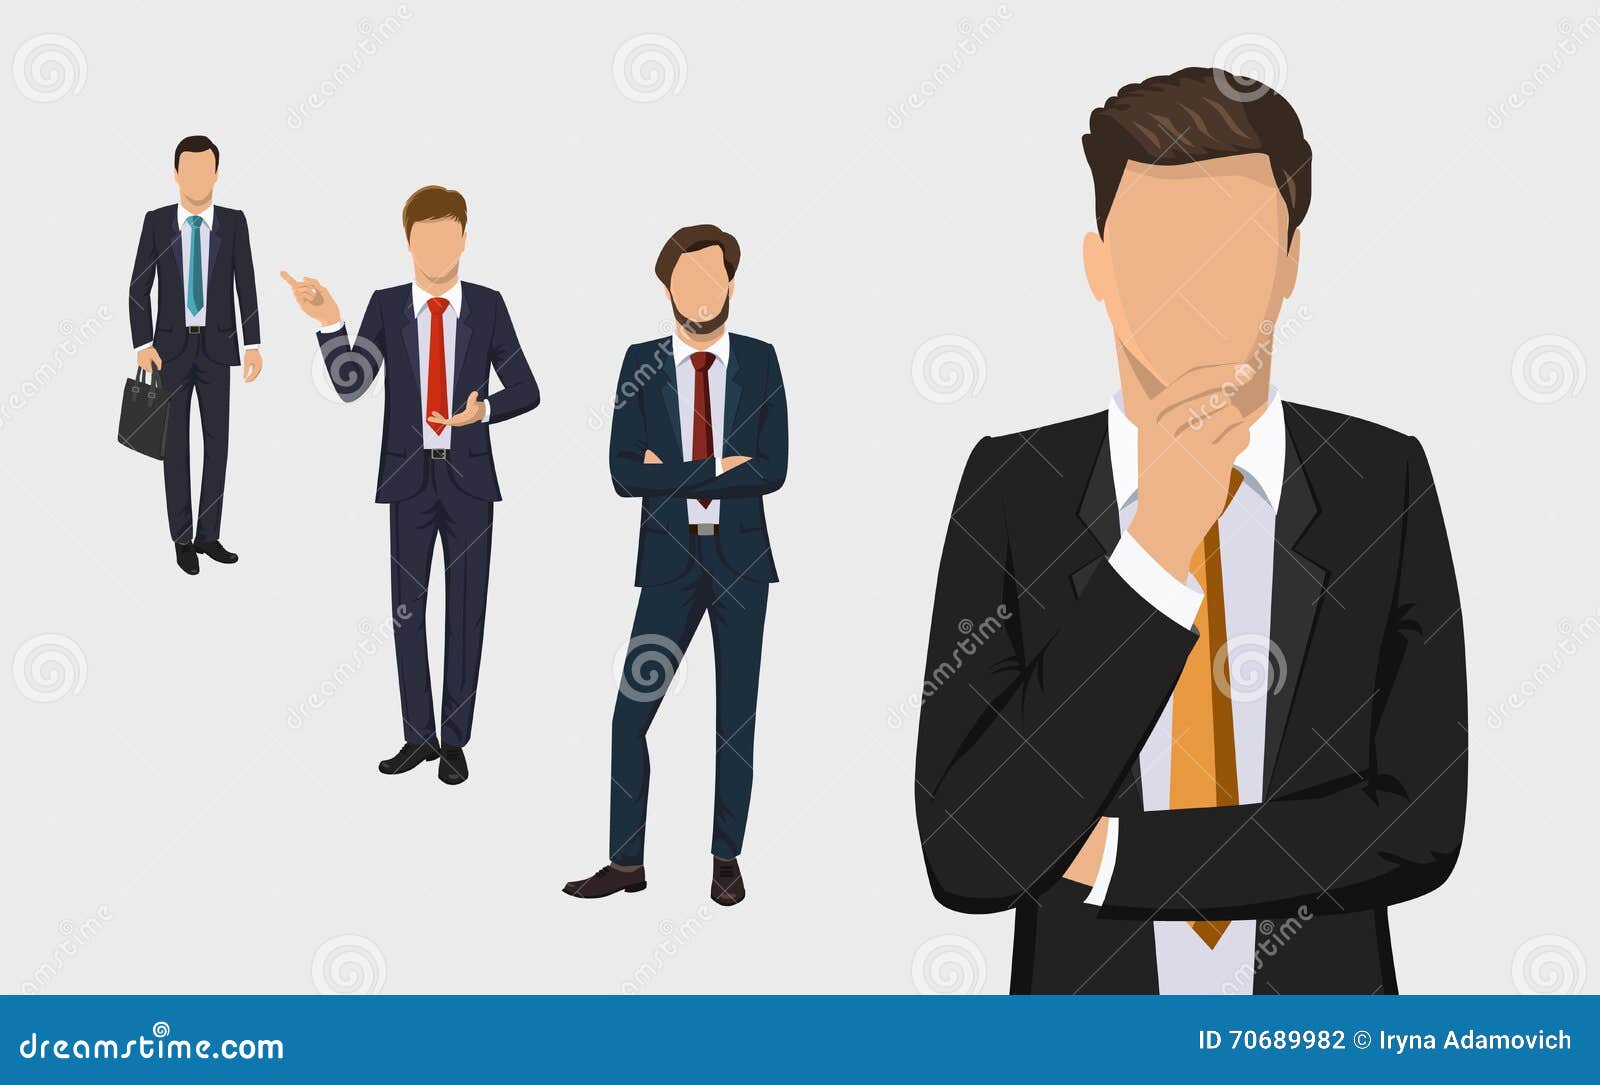 Business Man Set. Vector Collection of Full Length Portraits of ...